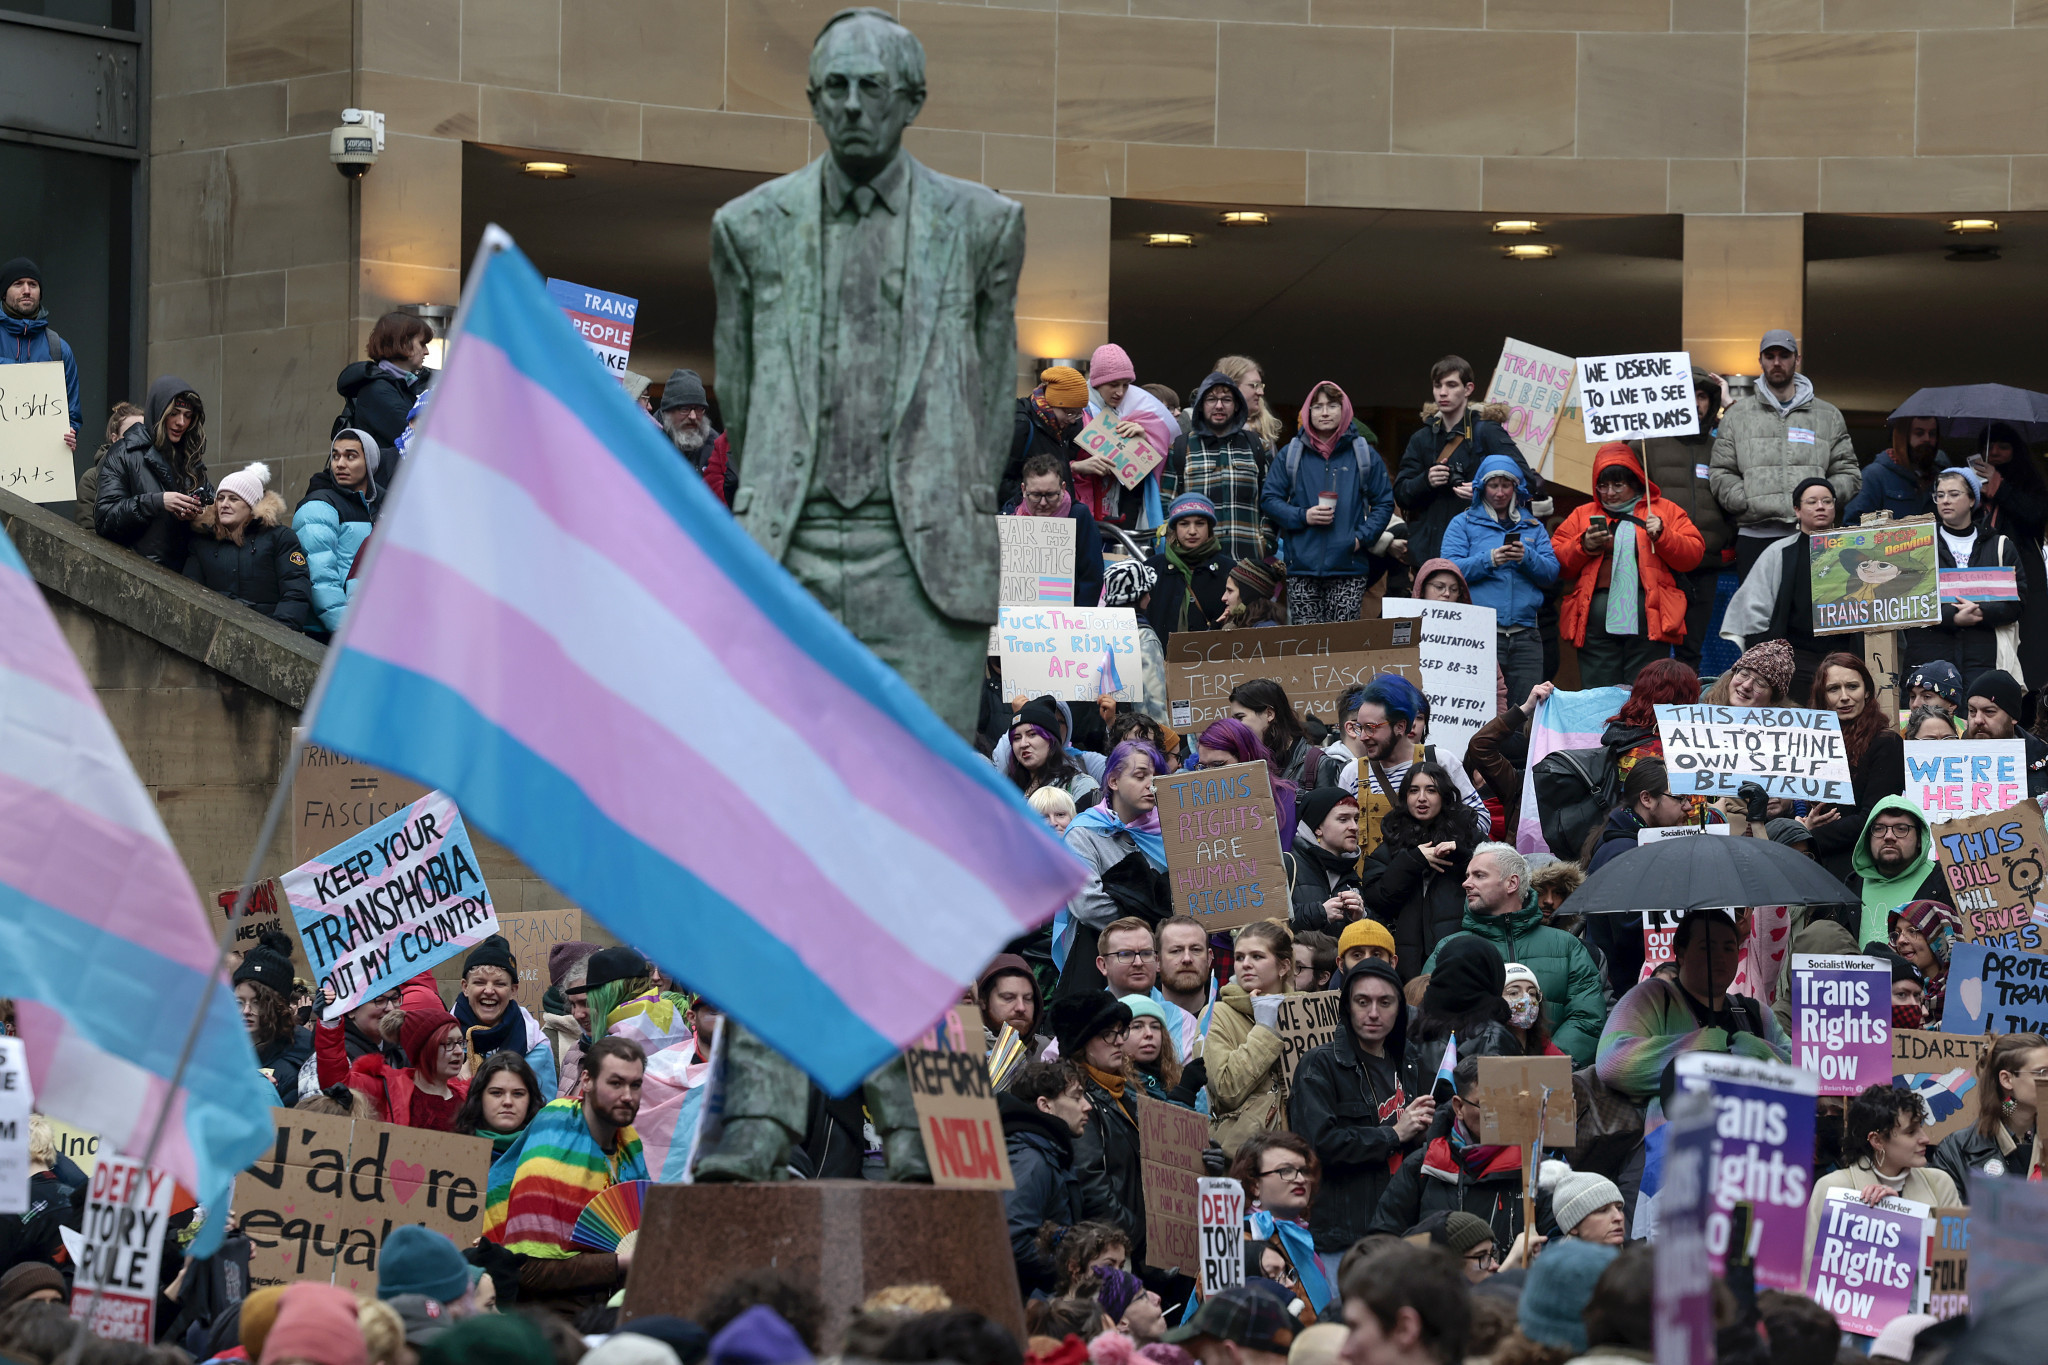 Transgender rights has been a dominant talking point in the UK recently ©Getty Images